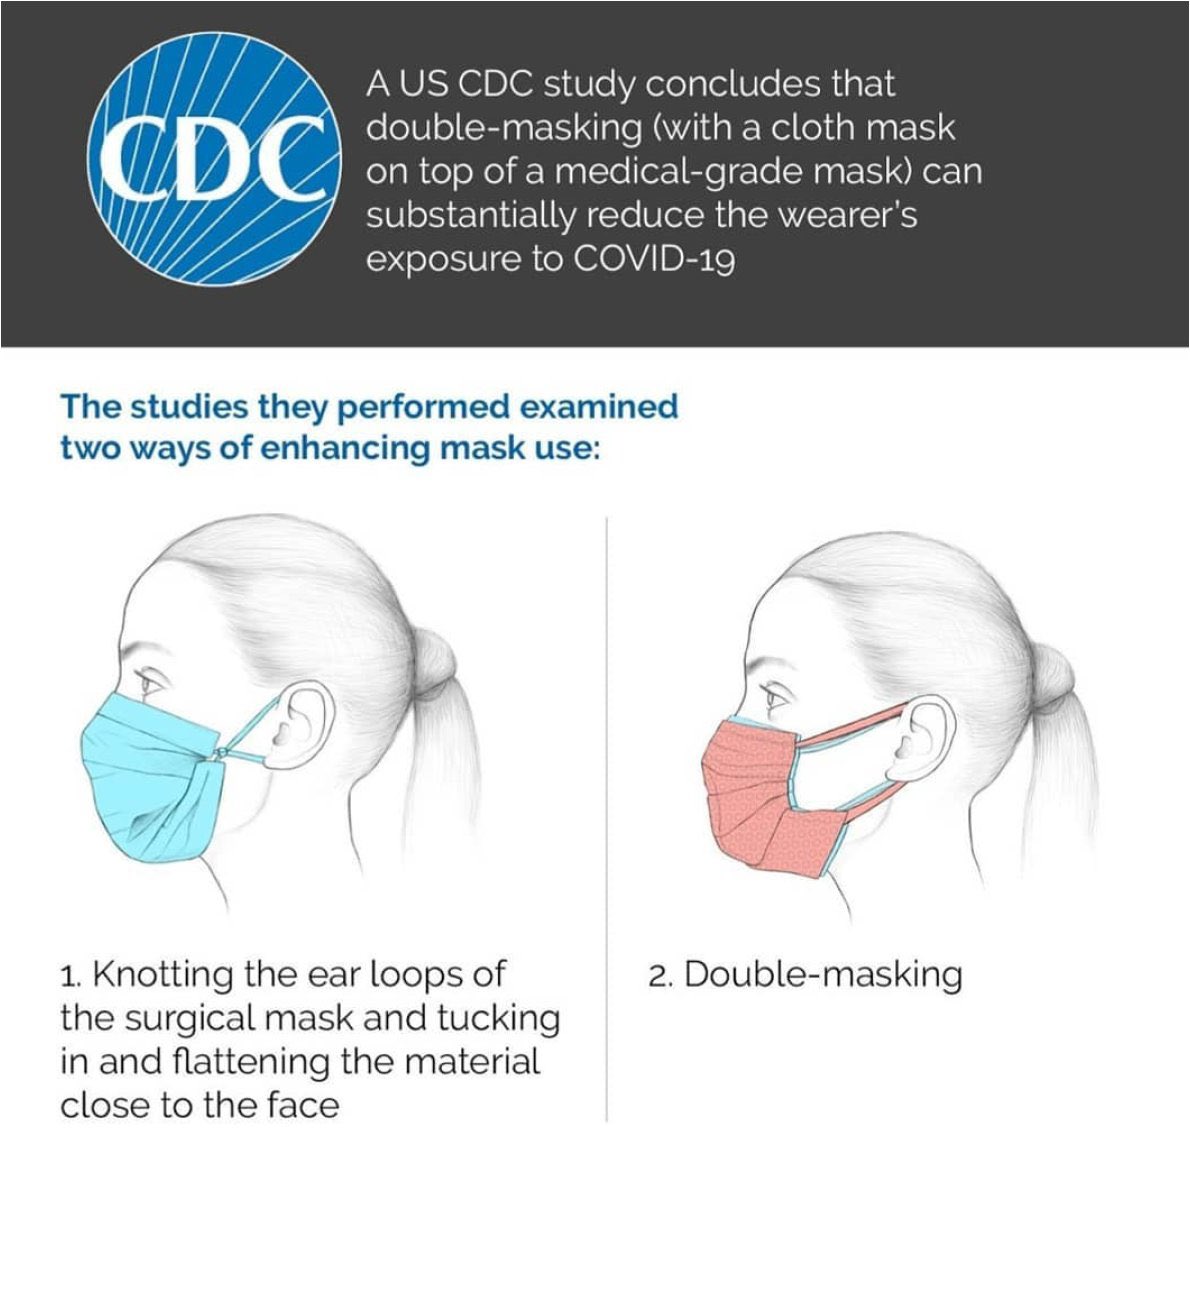 US CDC Double-Masking Knot and Tuck